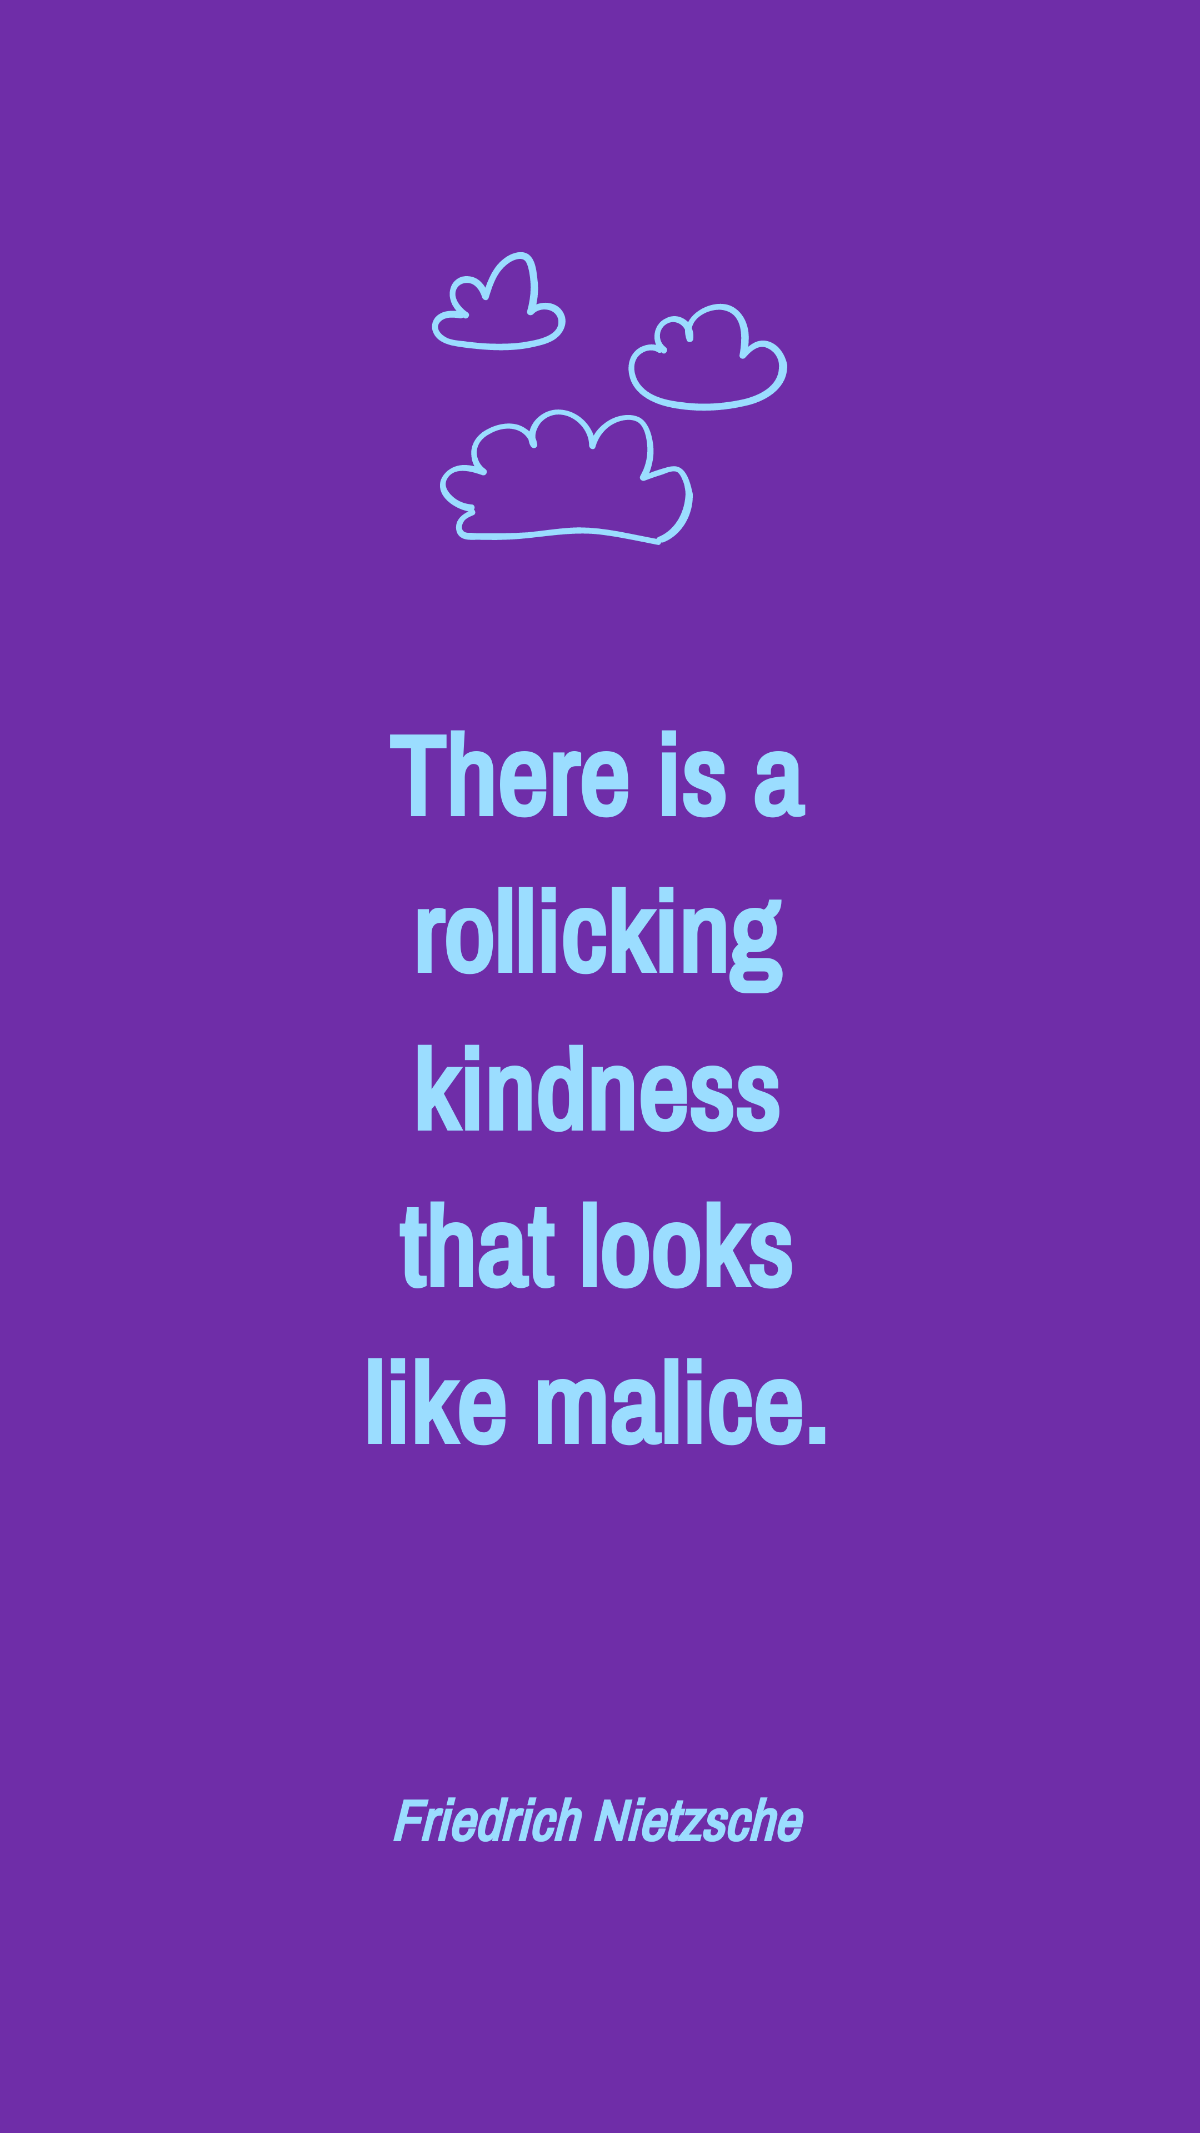 Friedrich Nietzsche - There is a rollicking kindness that looks like malice. Template